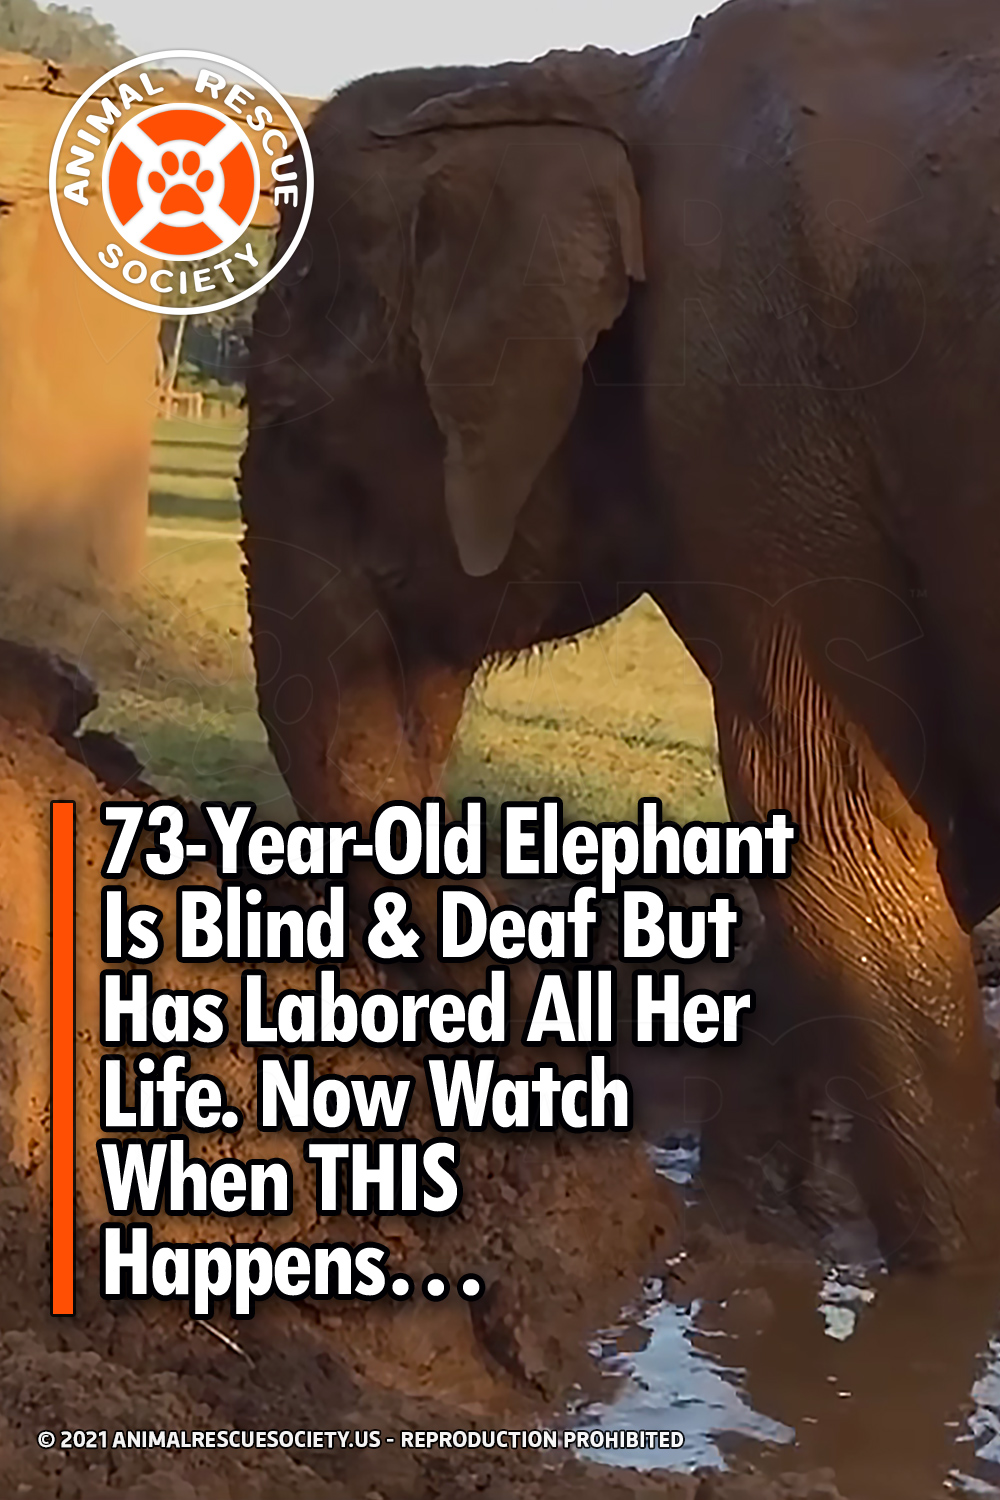 73-Year-Old Elephant Is Blind & Deaf But Has Labored All Her Life. Now Watch When THIS Happens…